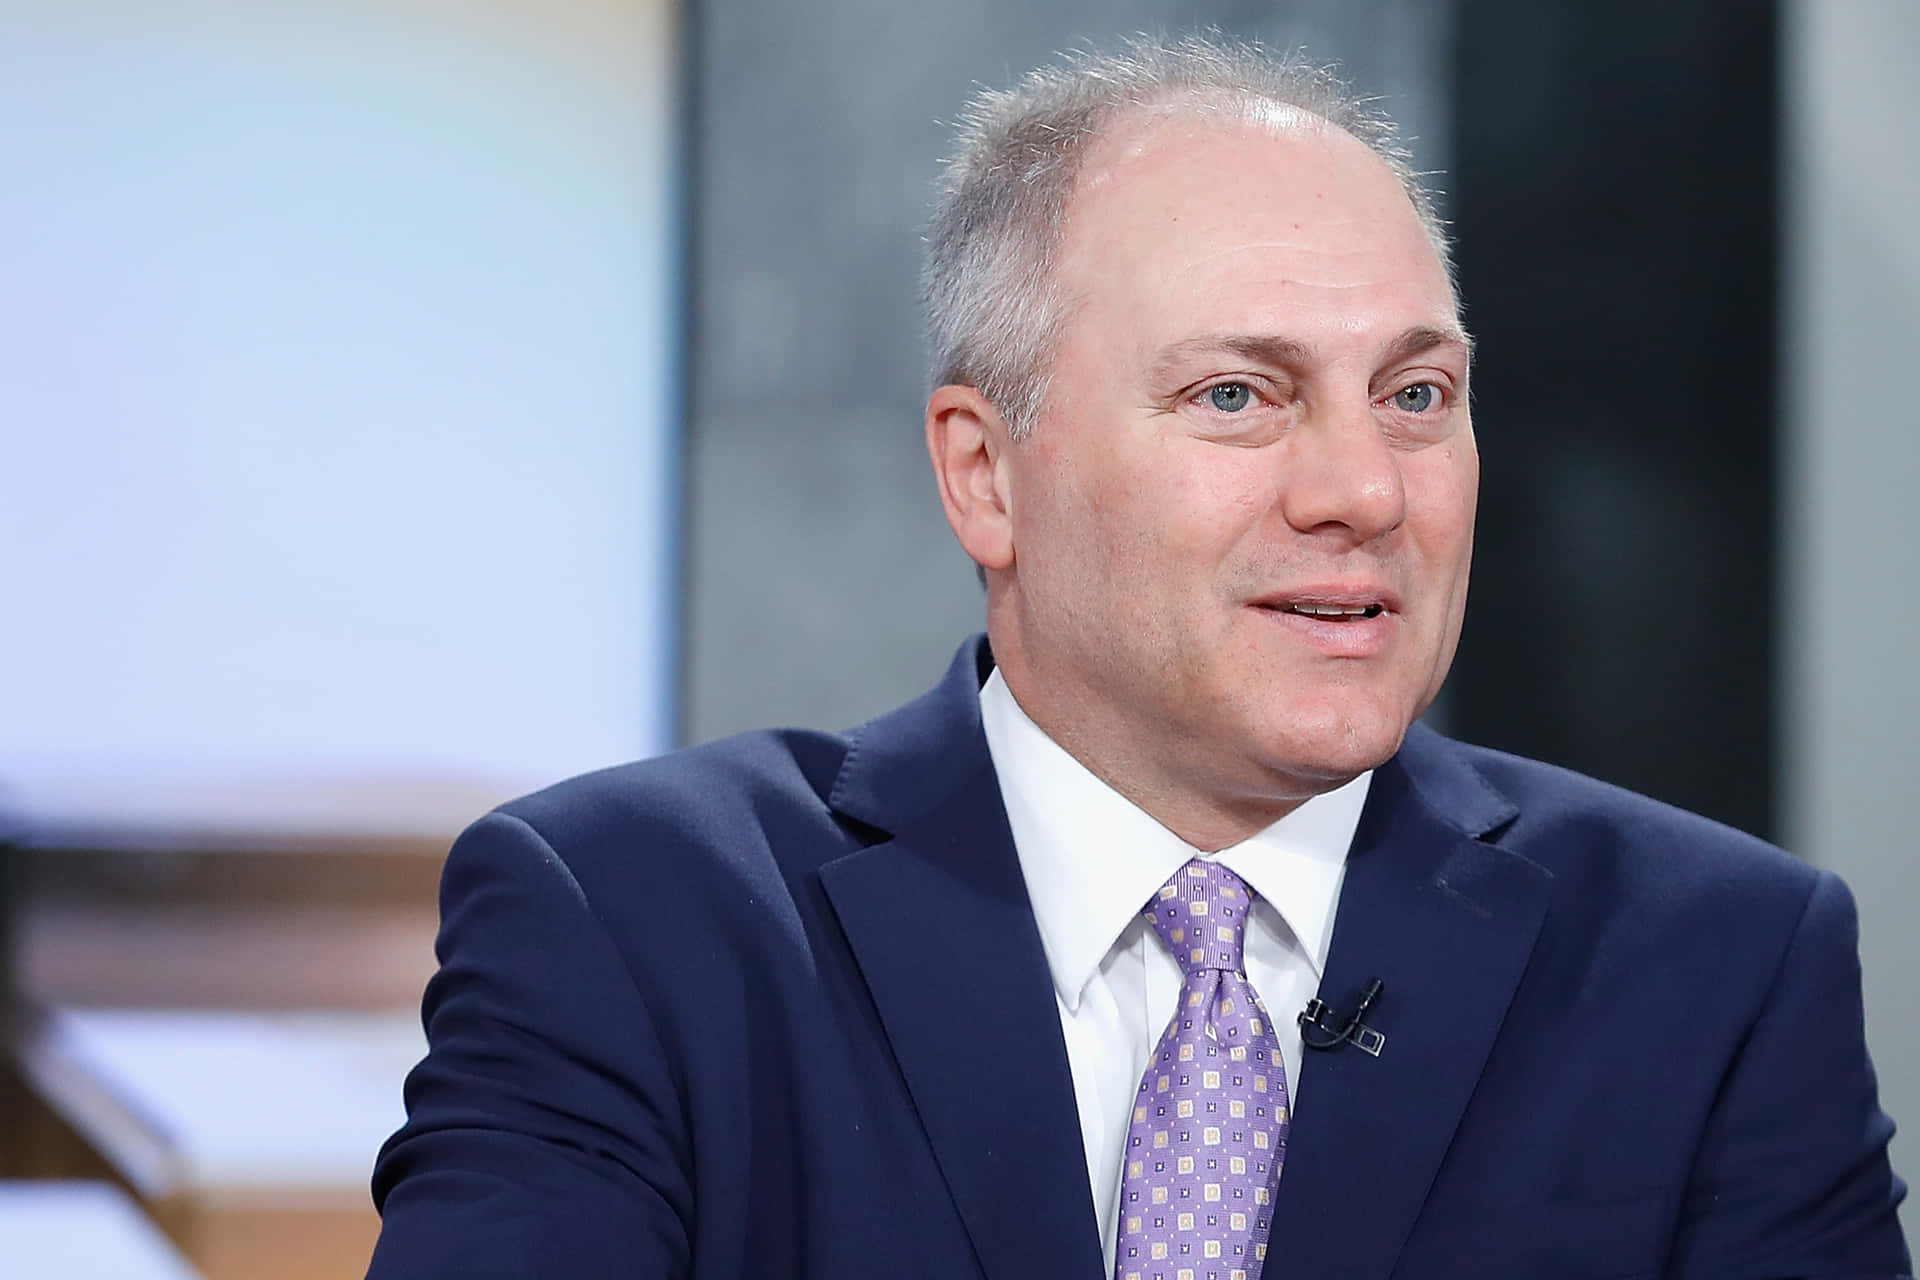 Steve Scalise confidently smirking during an interview Wallpaper